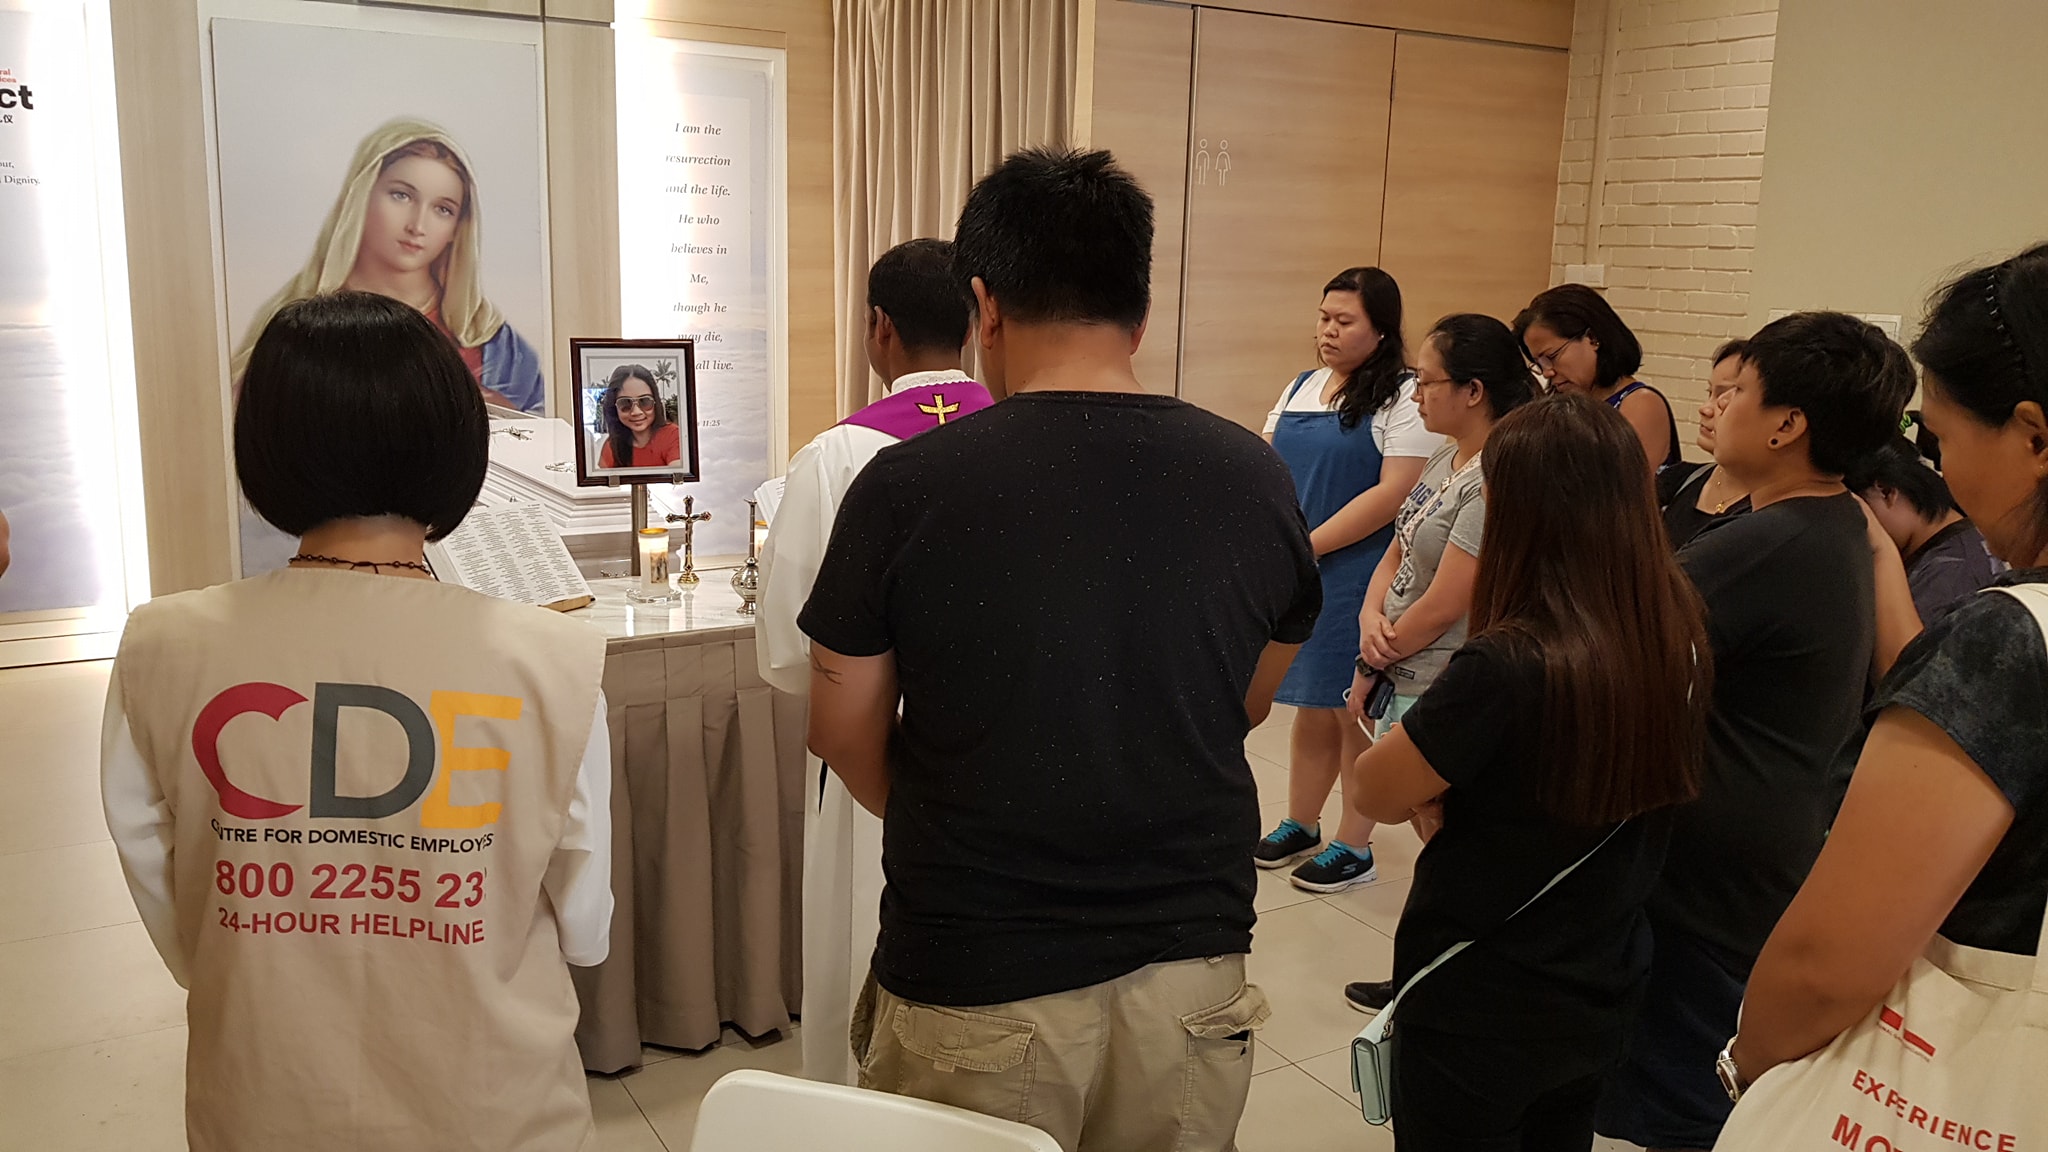 A memorial service is held Tuesday for Lucky Plaza victim Abigail Danao Leste. Photo: Center for Domestic Employees/Facebook